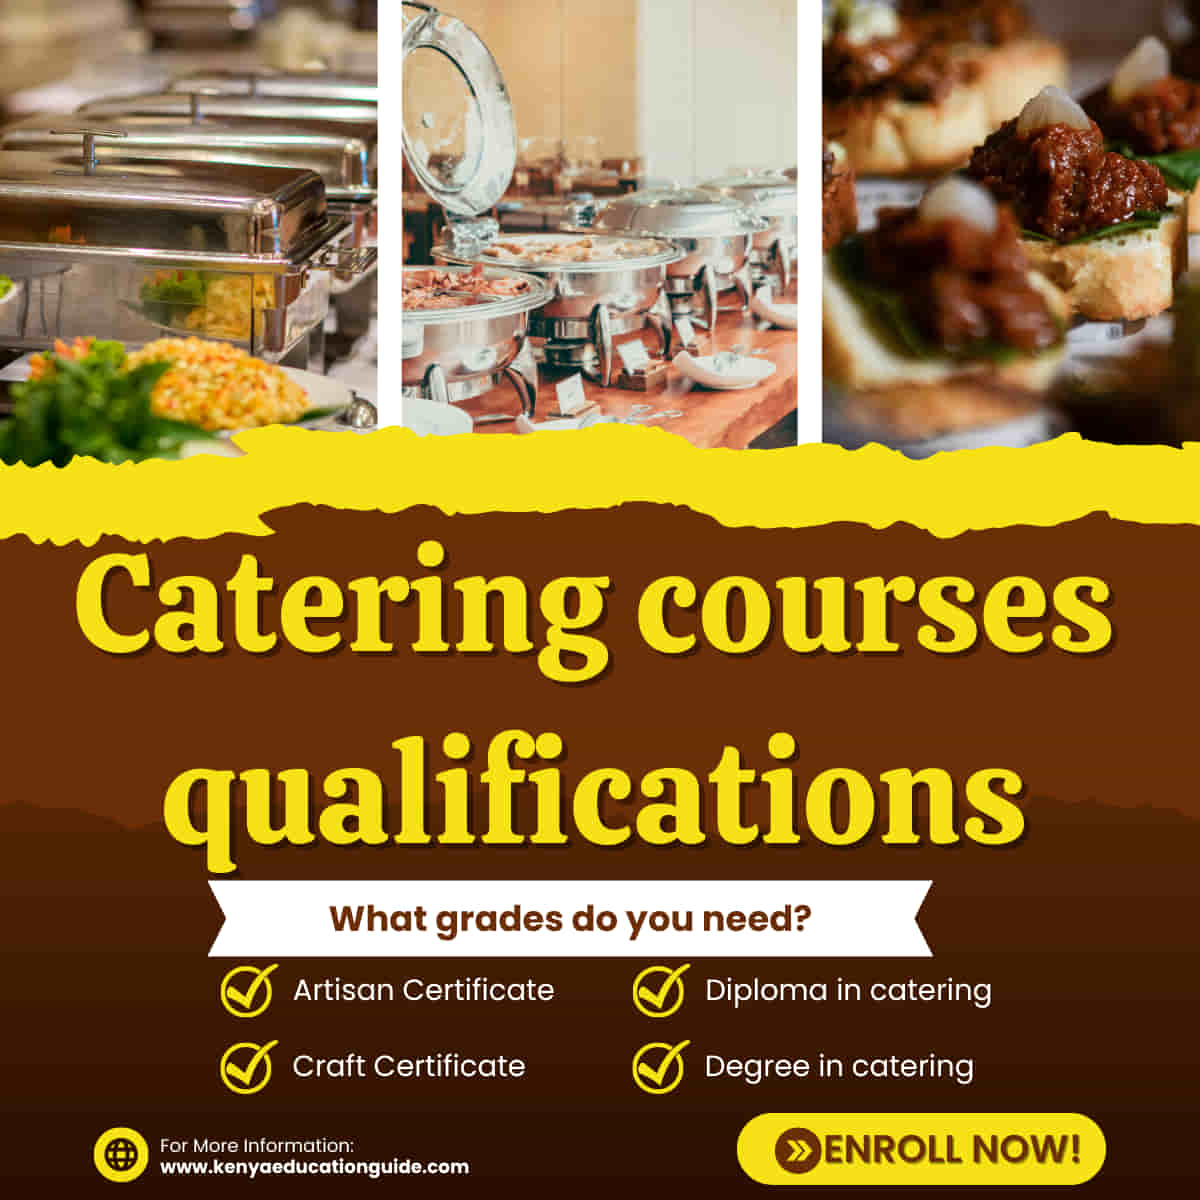 Catering courses qualifications